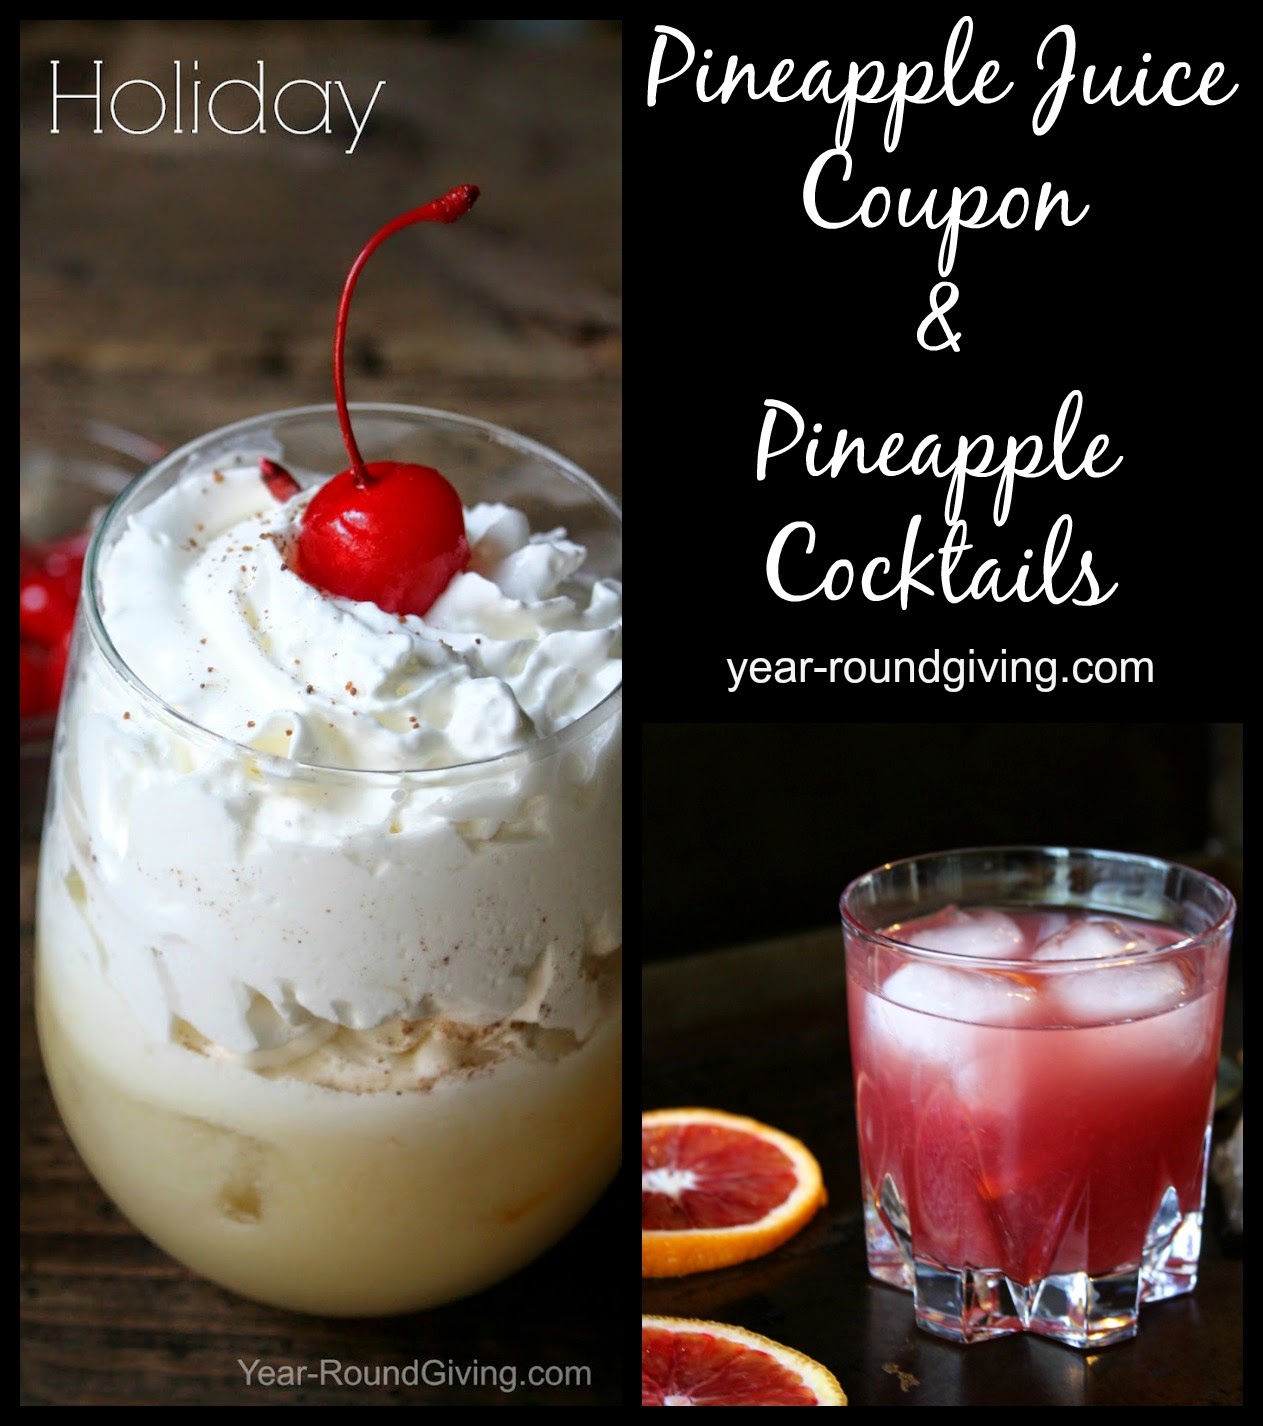 $1/1 Dole Pineapple Juice coupon and pineapple juice cocktail recipes